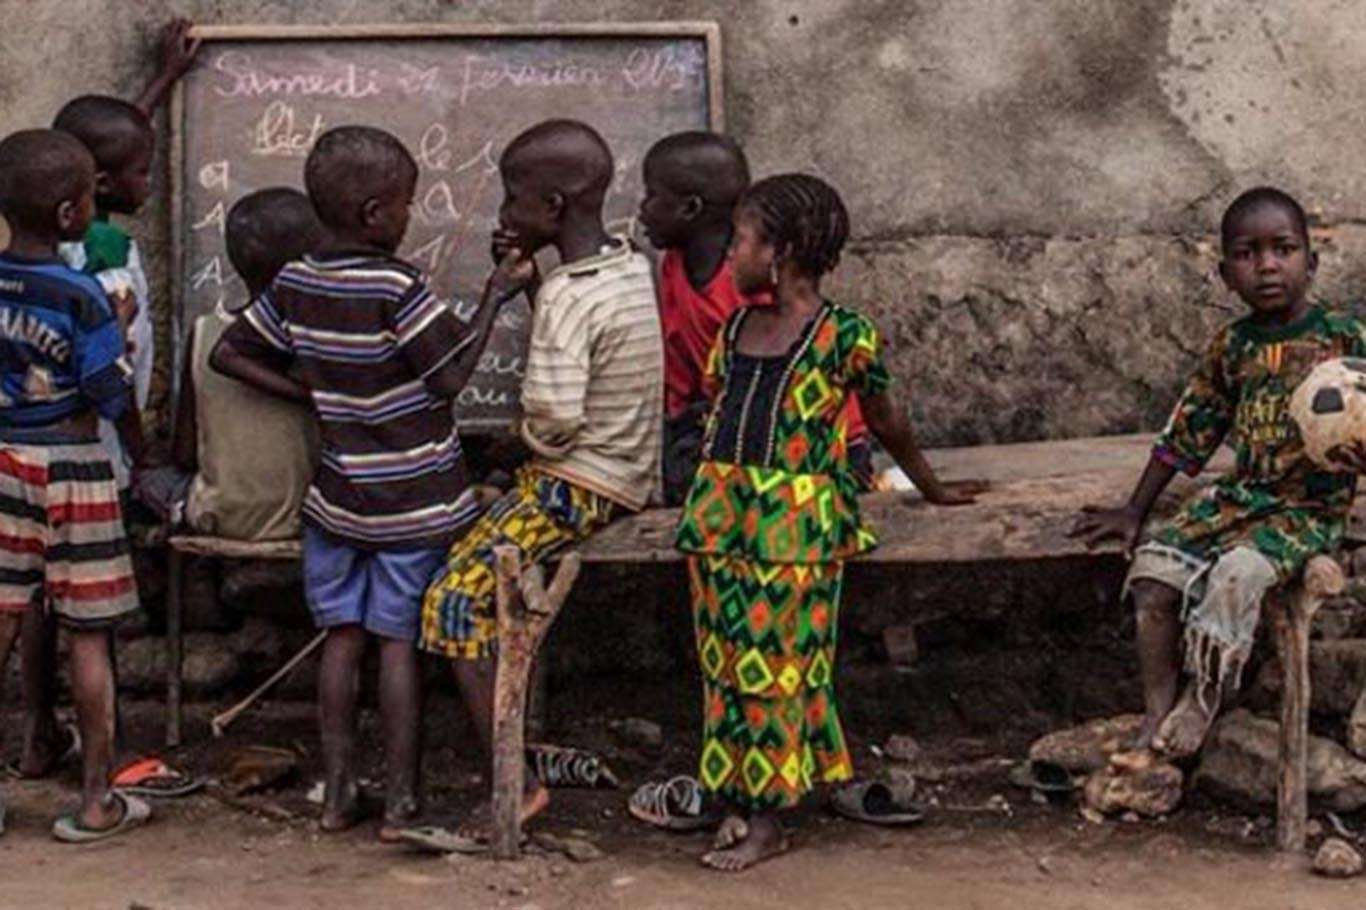 UNICEF: Over 635 million students remain affected by school closures due to COVID-19